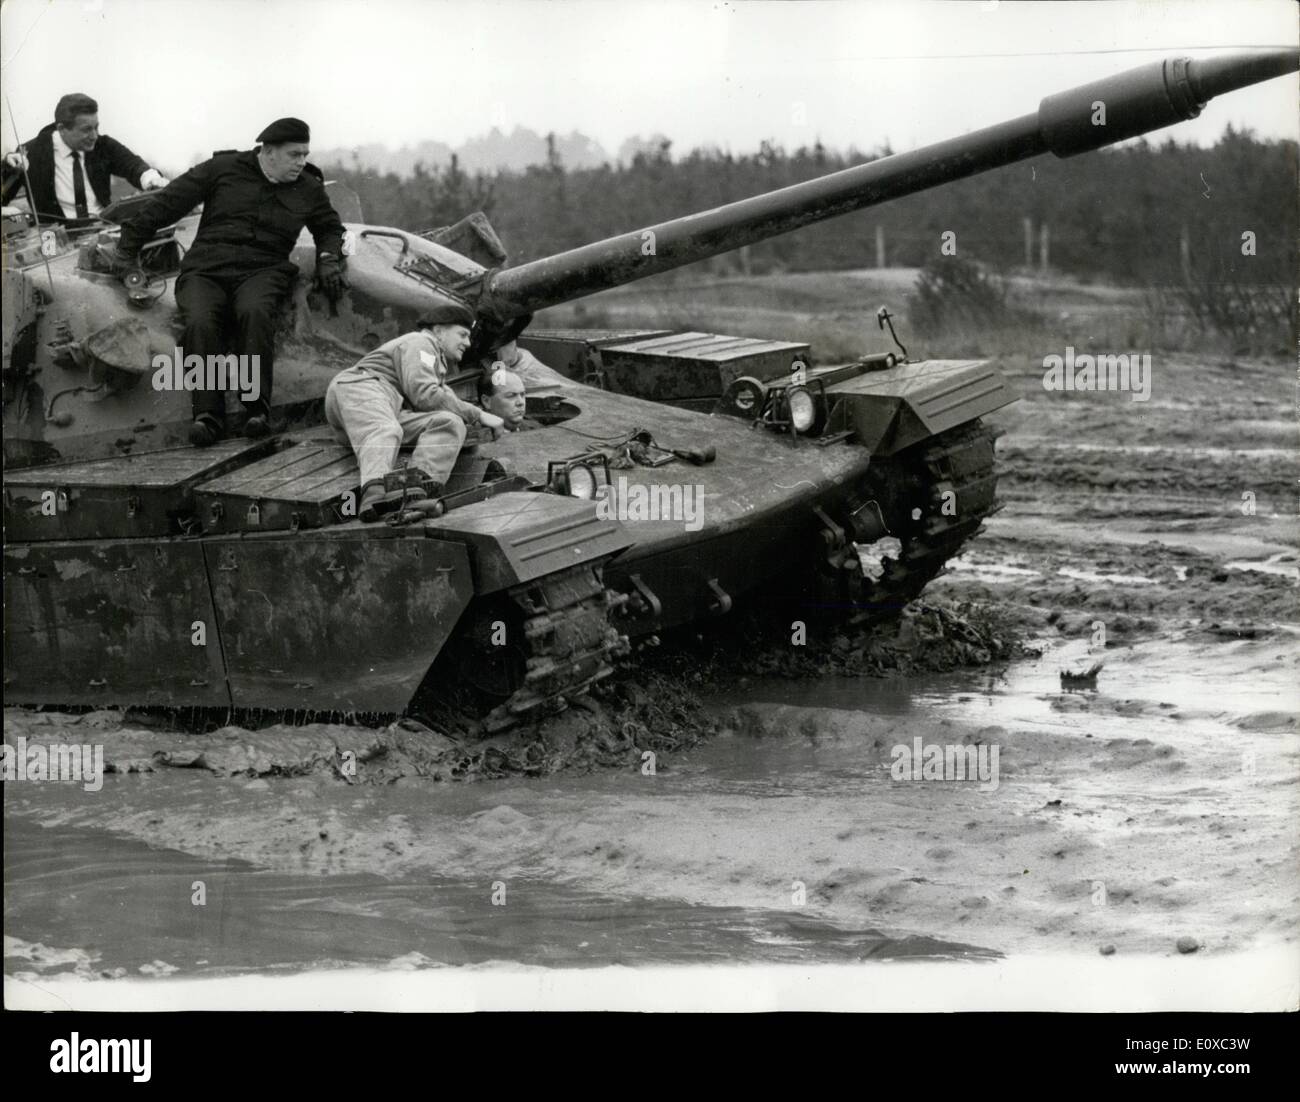 Feb. 02, 1966 - The Army Minister Gets a Mudbath as he tries out Army Minister Mr. Gerry Reynolds, tested Britain's newest and biggest tank, the 50-ton Chieftain, yesterday - and gave himself a mudbath. It happened when the Minister decided to drive the giant tank himself over a water logged stretch of open country at the Army's testing ground at Bovington Camp in Dorset. It was Mr. Reynold's first attempt at driving a tank. He drove off with his instructor, Sergeant Bert Gurr sitting beside him in the forward driving position. The tank ploughed through a huge puddle, and Mr Stock Photo